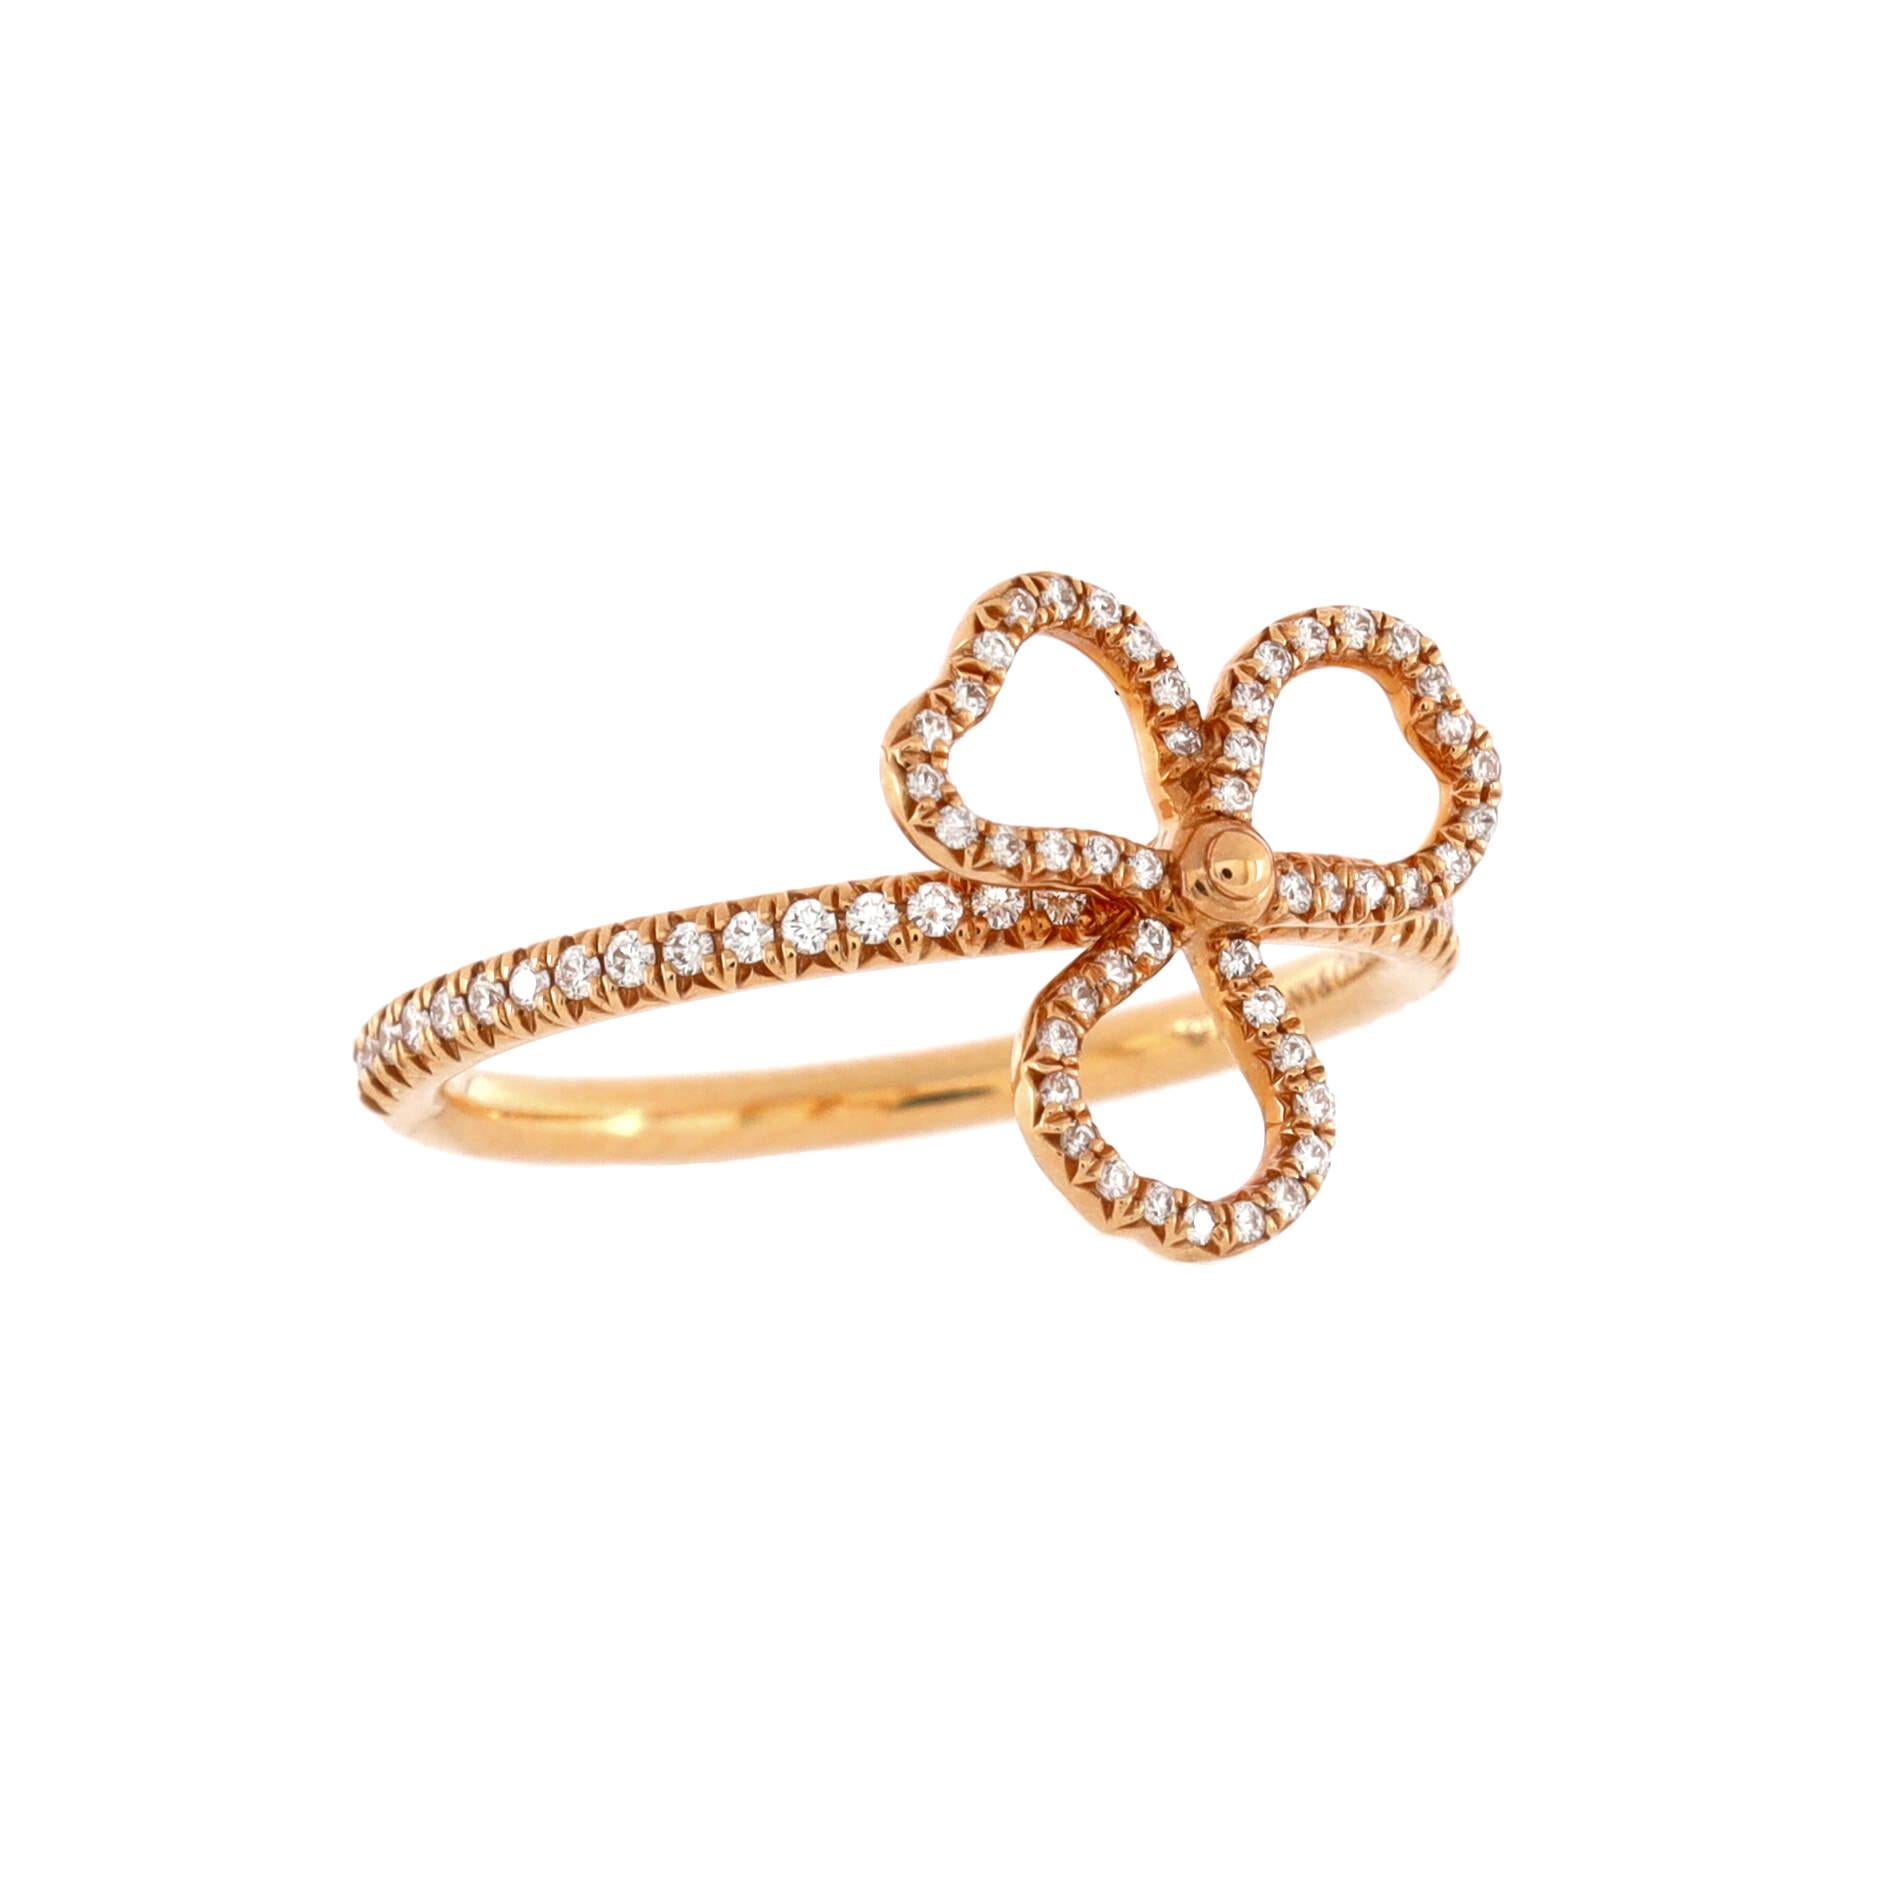 Condition: Great. Minor wear throughout.
Accessories: No Accessories
Measurements: Size: 5.5, Width: 1.65 mm
Designer: Tiffany & Co.
Model: Paper Flowers Open Ring 18K Rose Gold and Diamonds Mini
Exterior Color: Rose Gold
Item Number: 195033/7